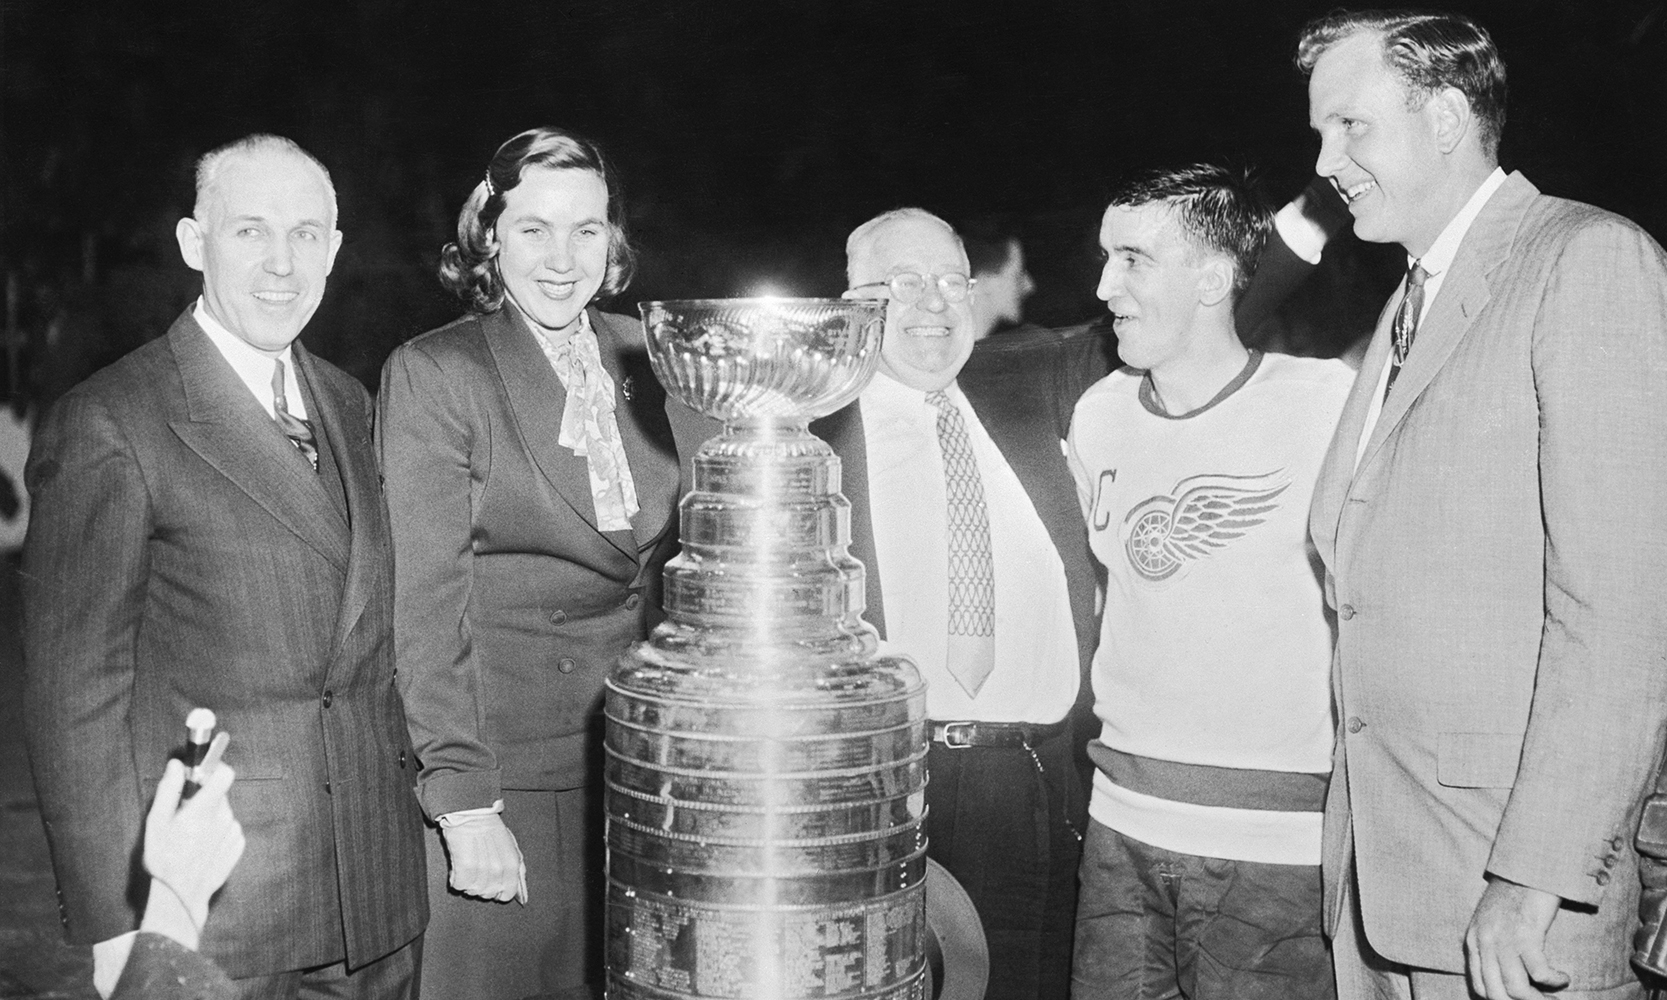 Detroit Red Wing player standing with 3 other men and 1 woman next to the Stanley Cup